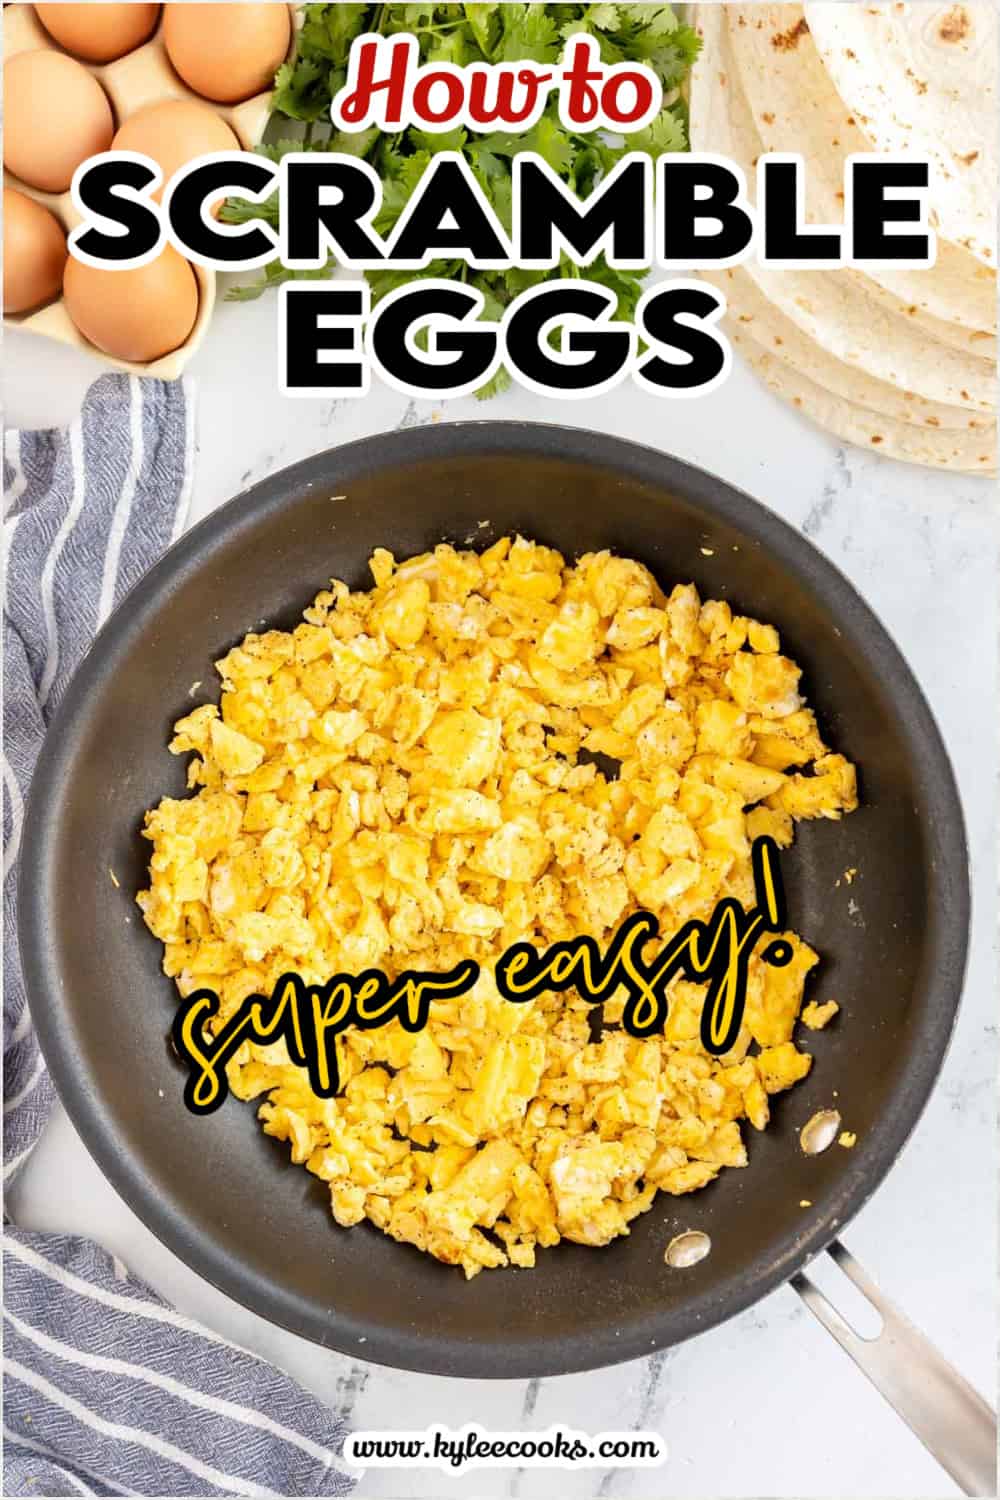 skillet with scrambled eggs in it with text overlaid.